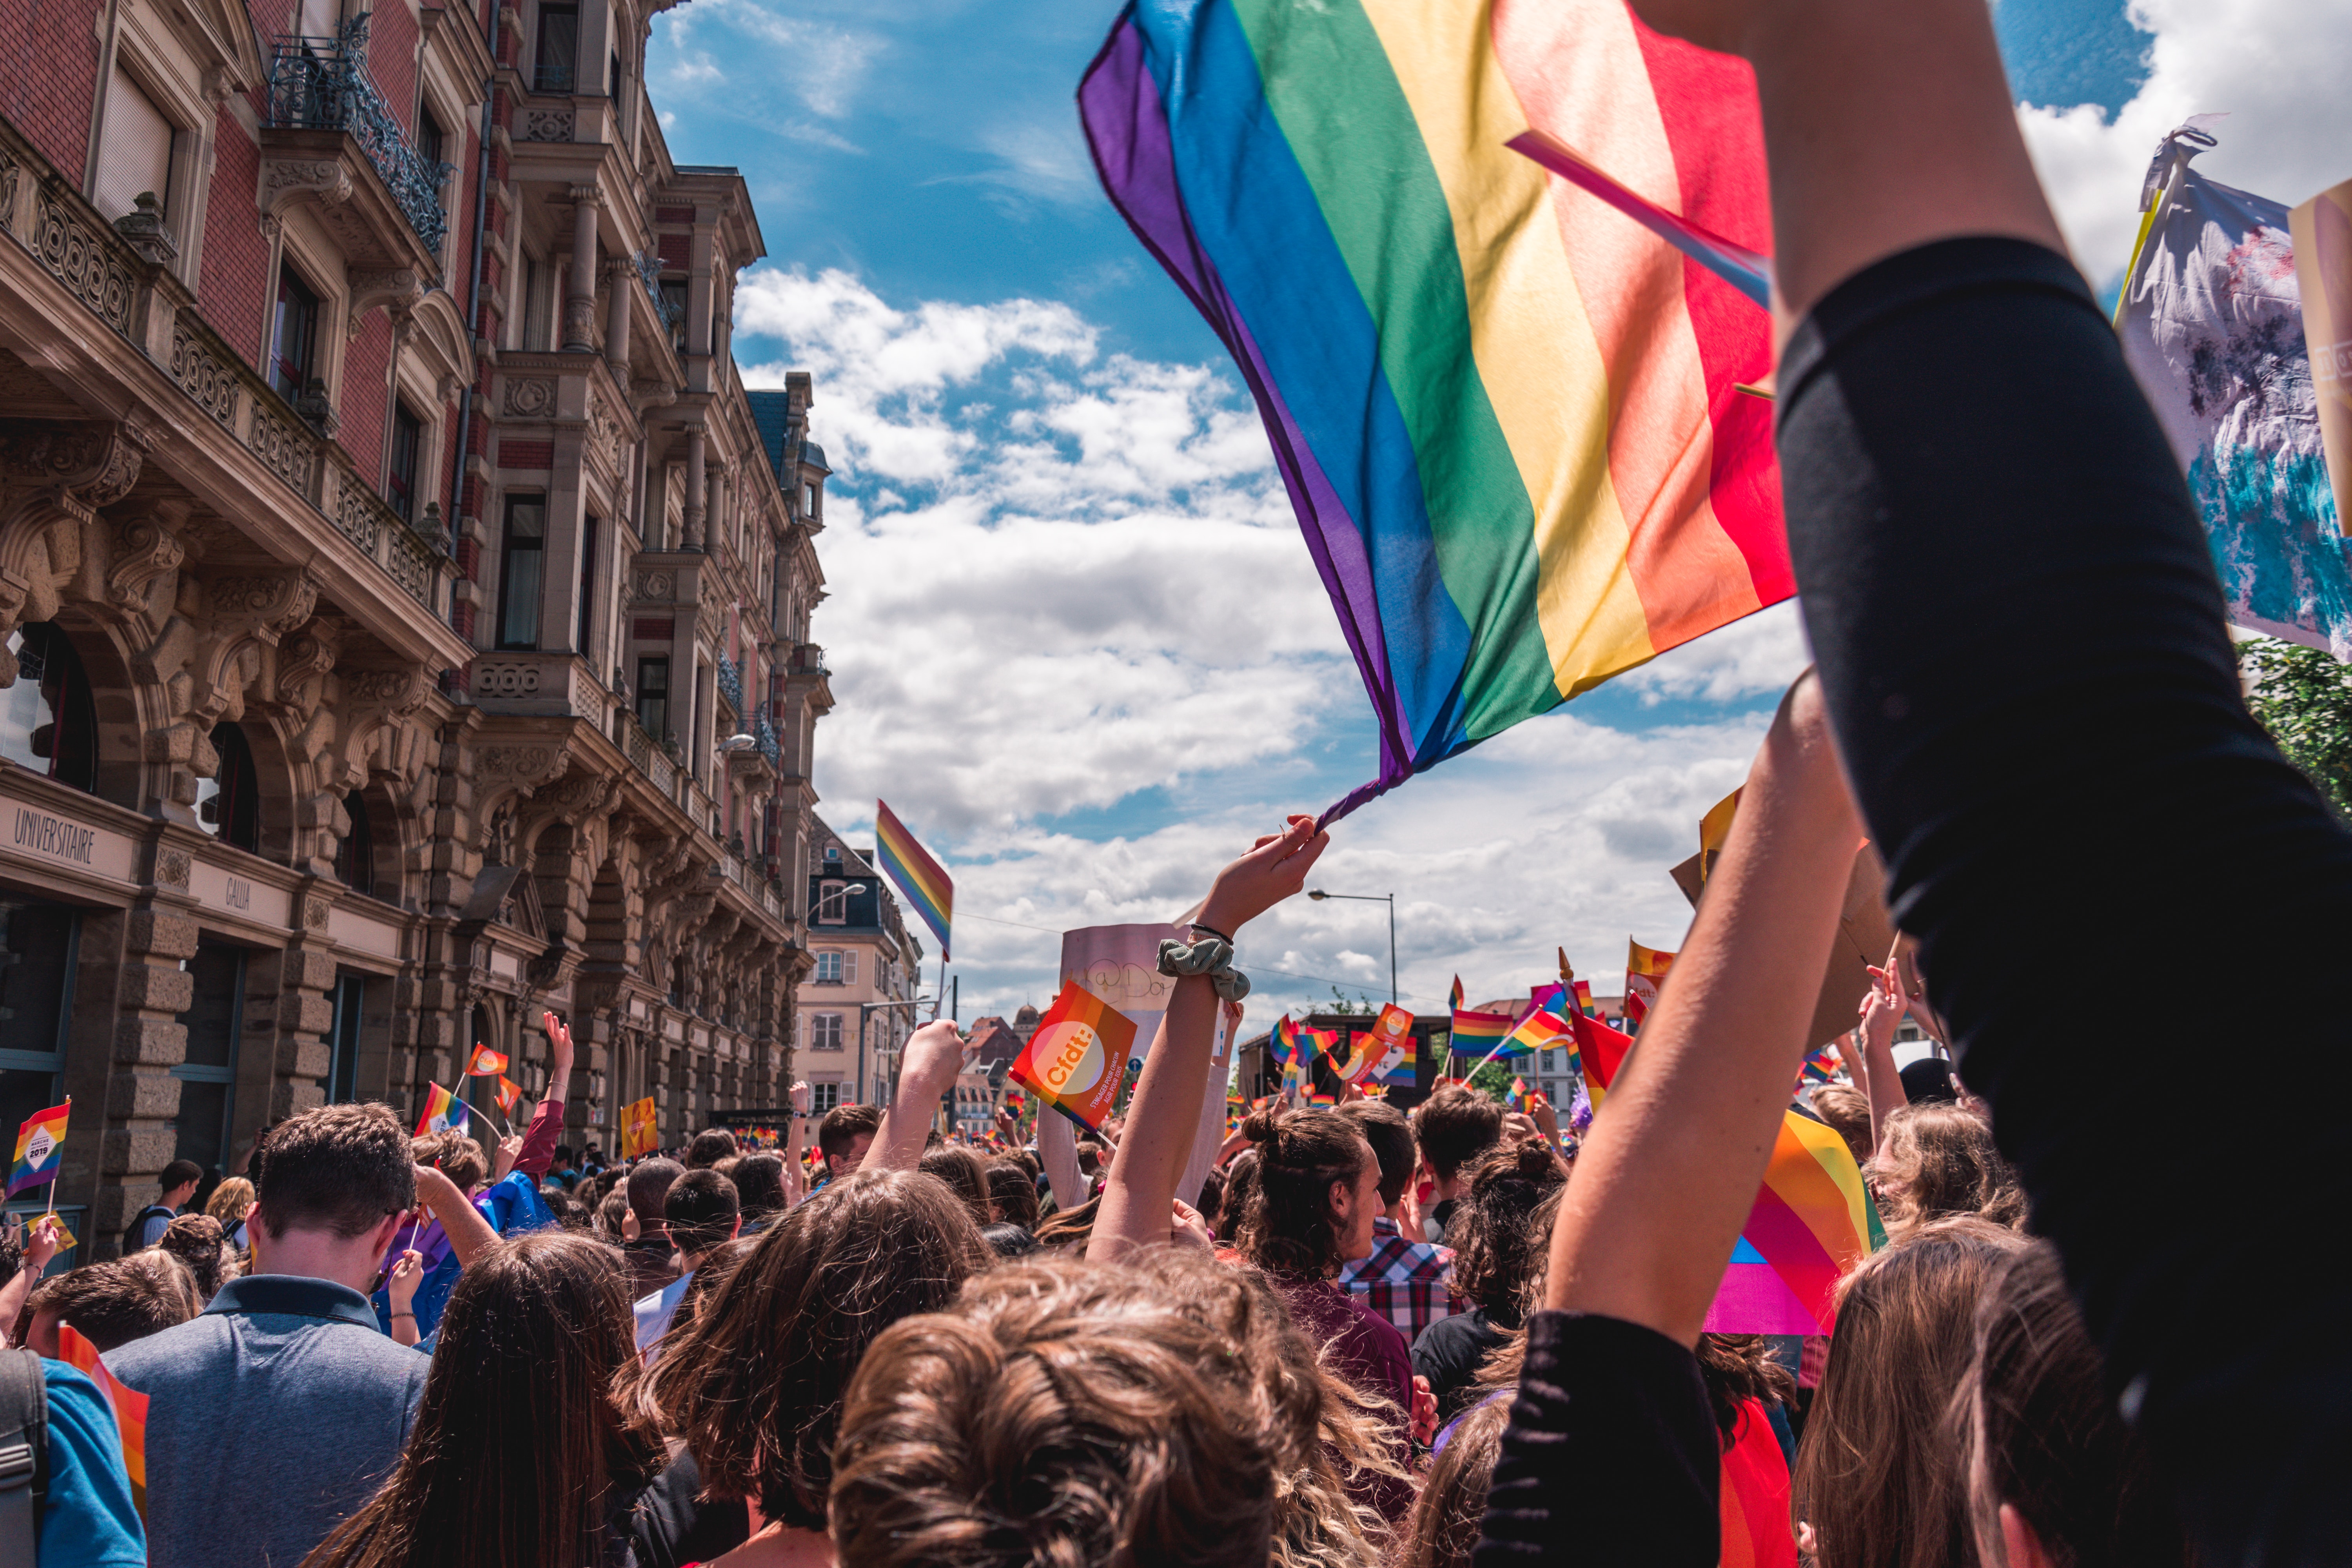 A crown of people at a Pride celebration, waving flags and looking joyful. Photo by Margaux Bellott.